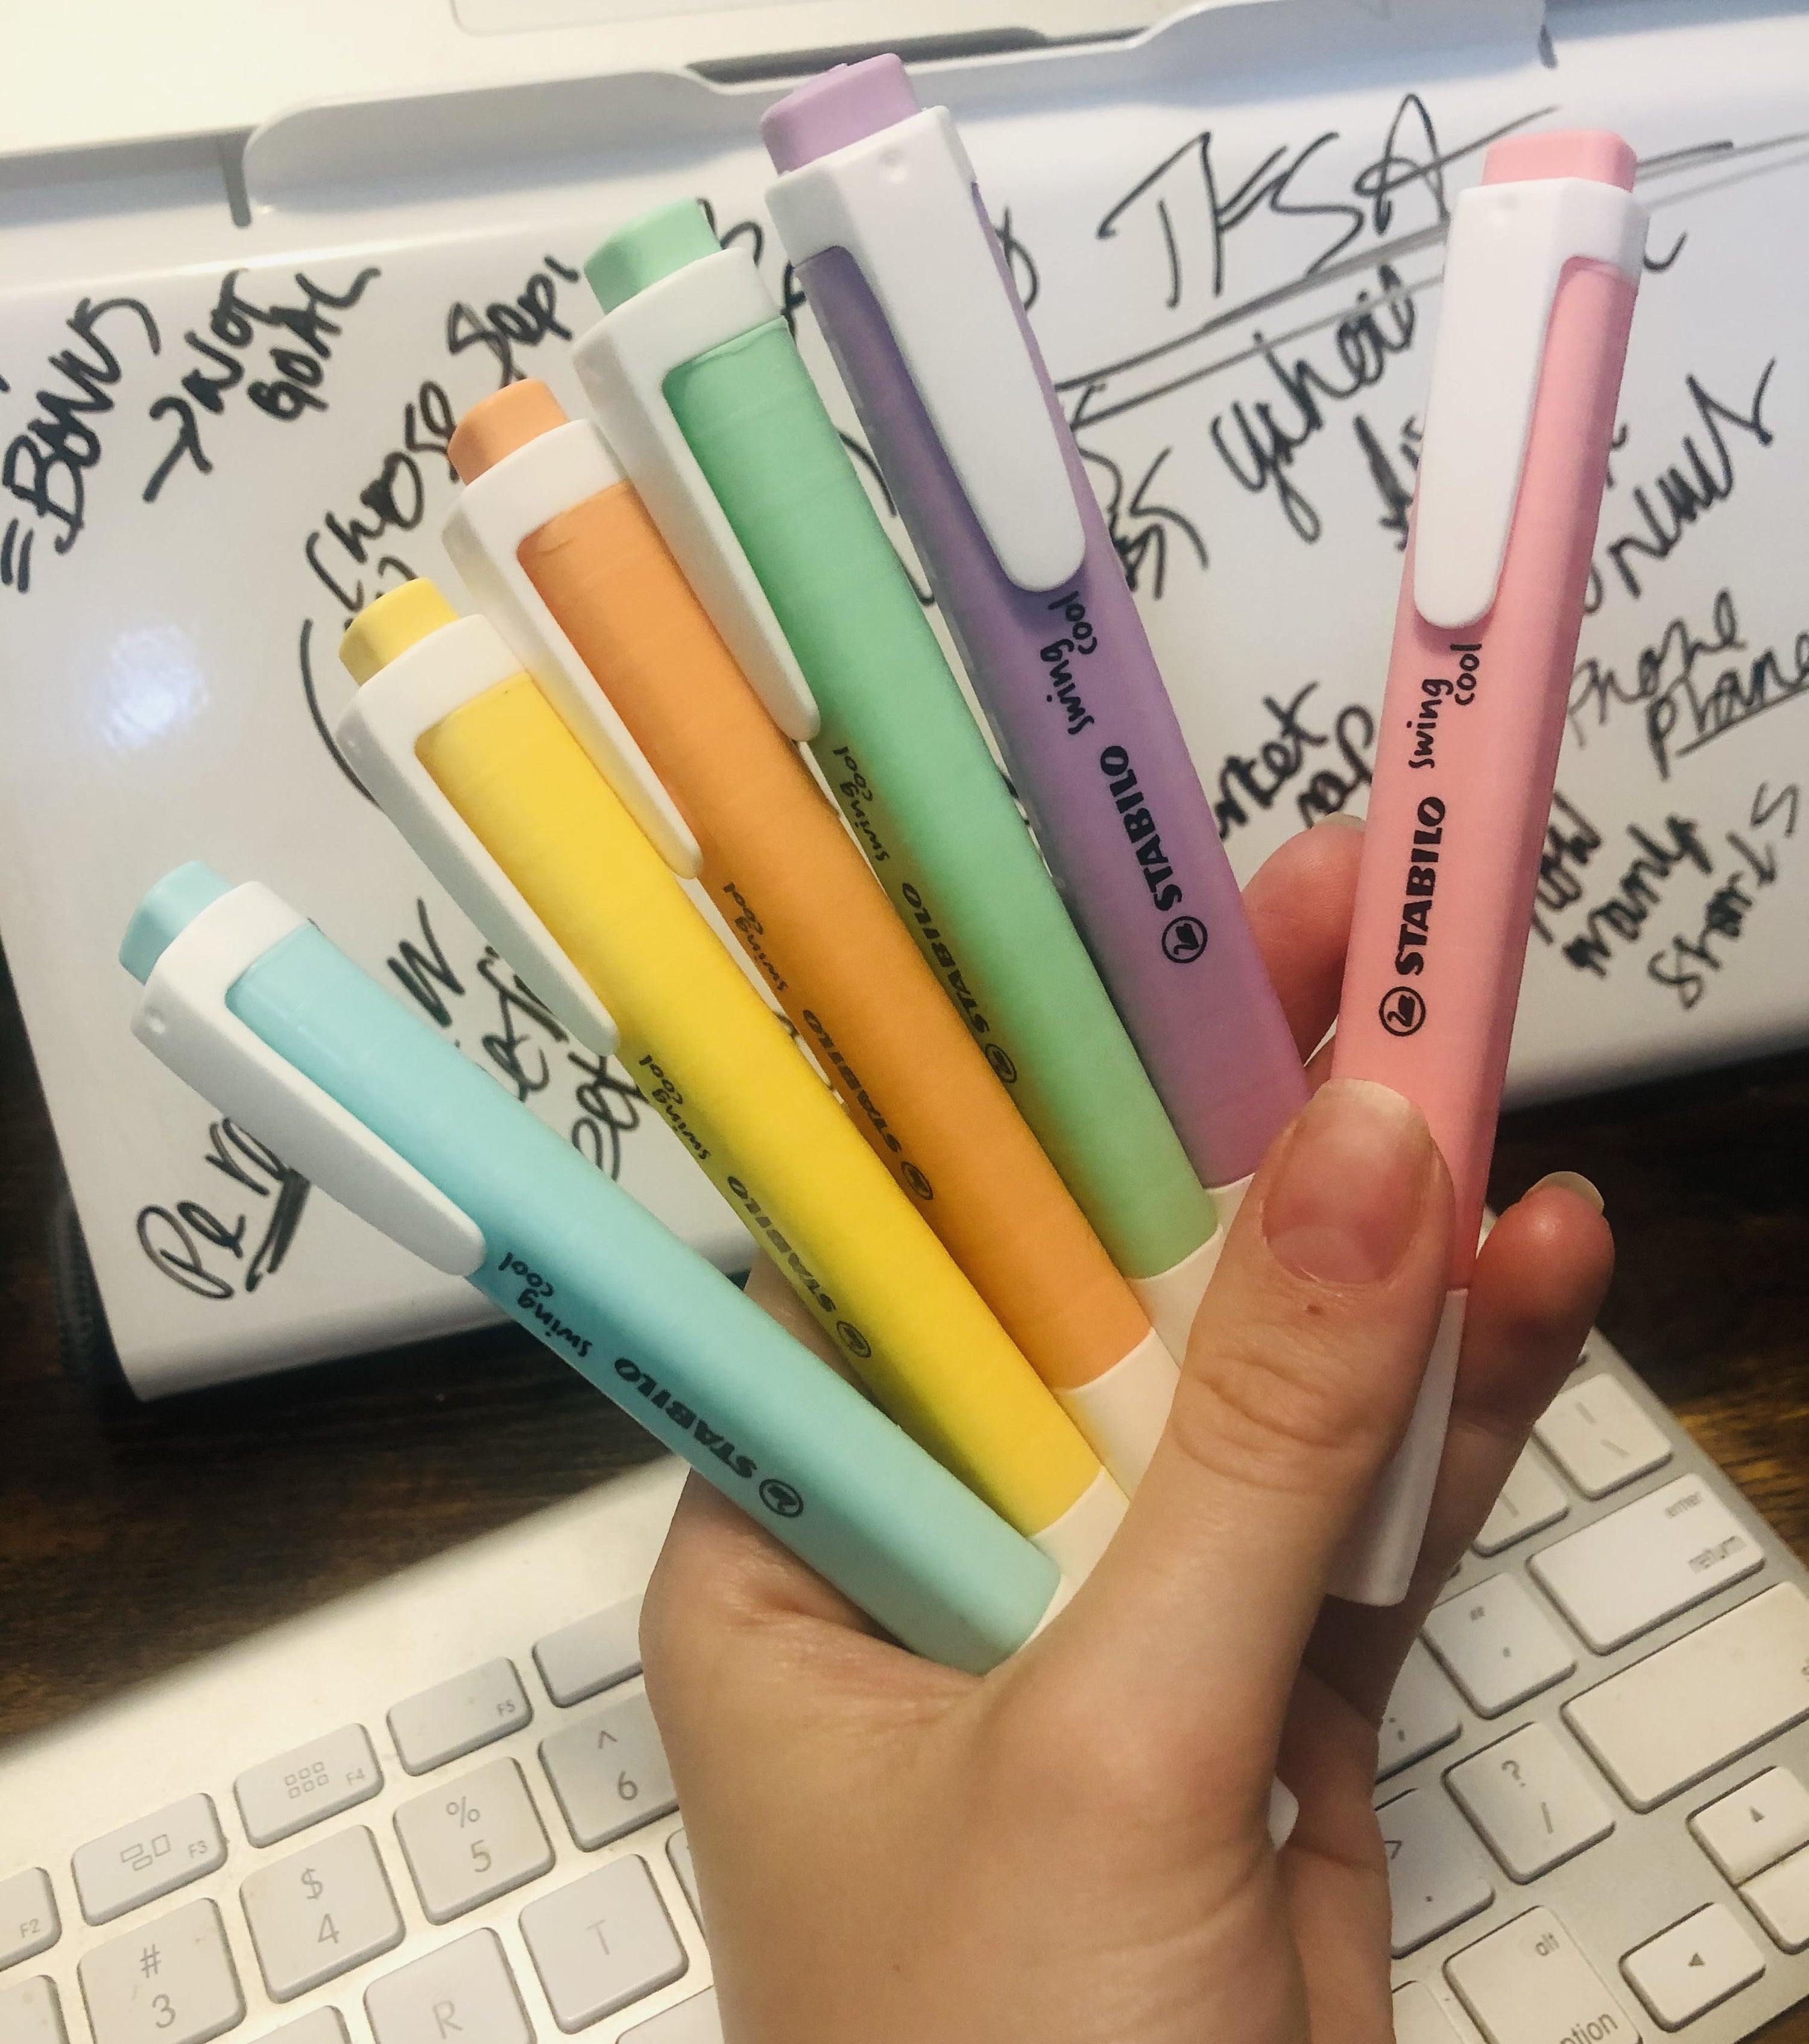 A person holding all six highlighters in front of a white board